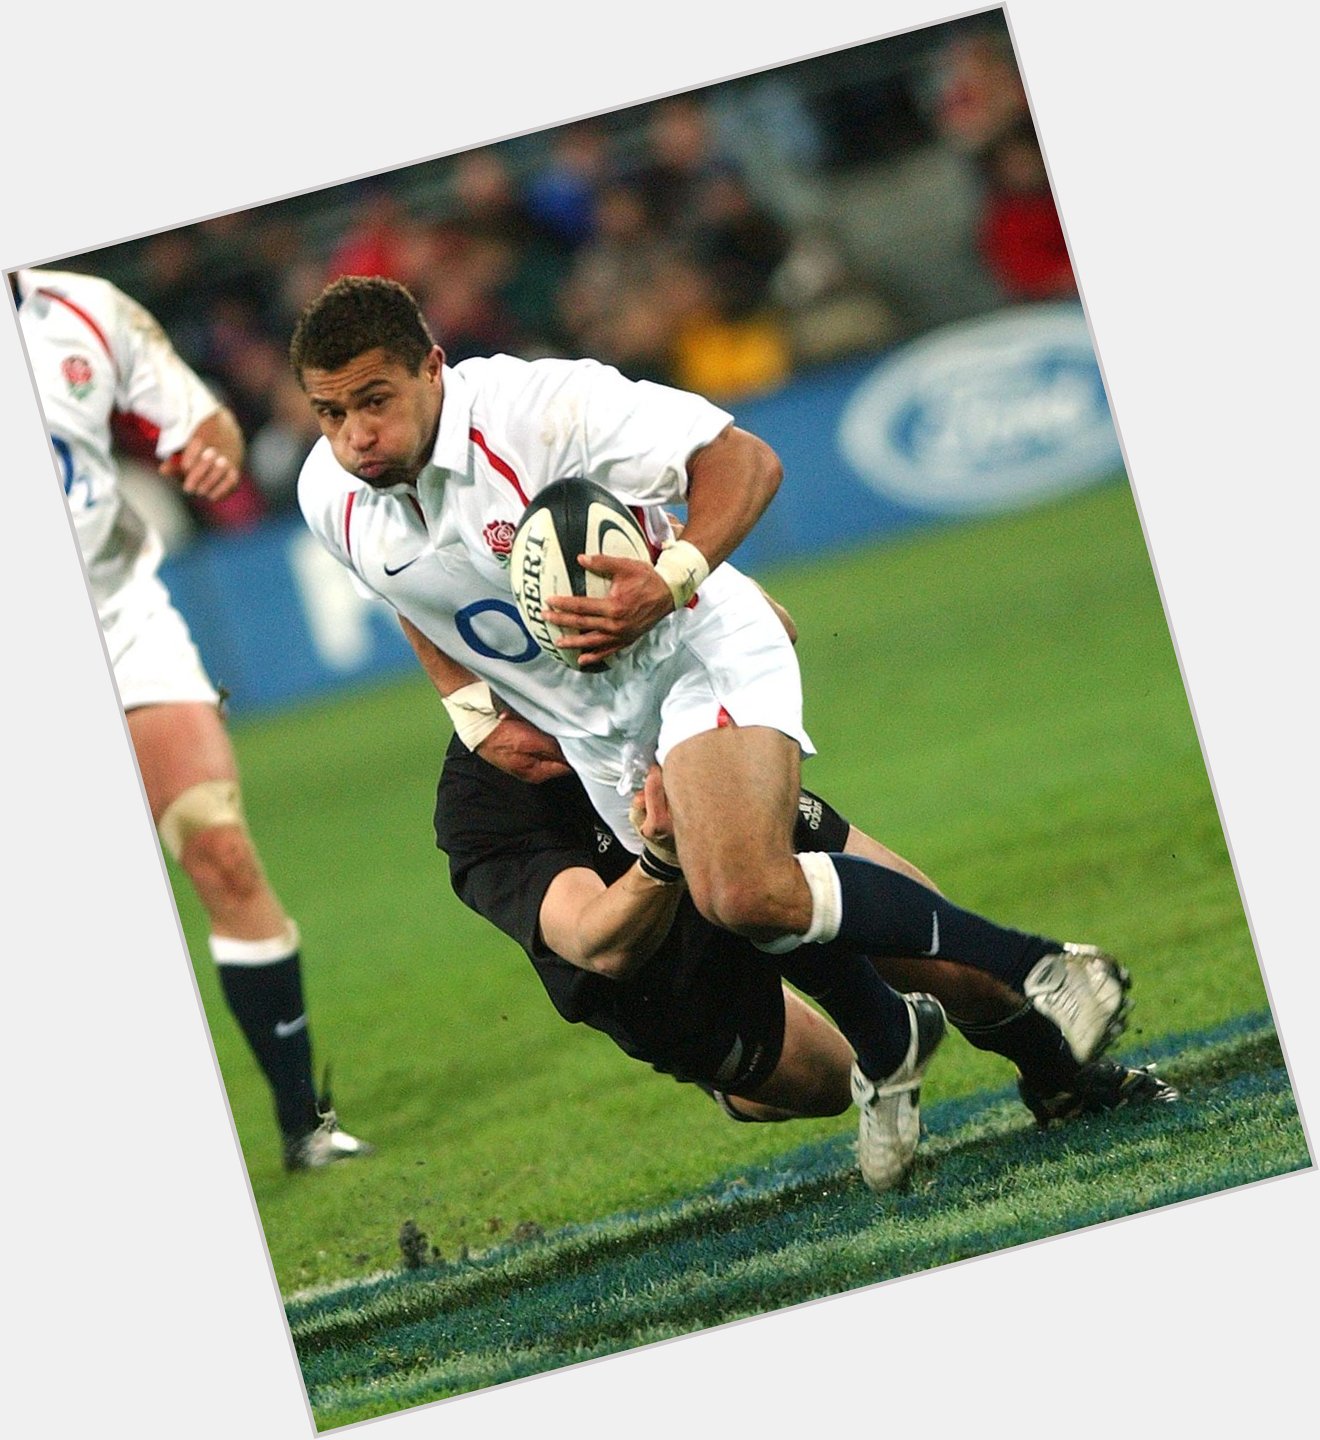 Happy 41st Birthday to former England fullback Jason Robinson! Part of the famous 2003 World Cup winning team! 